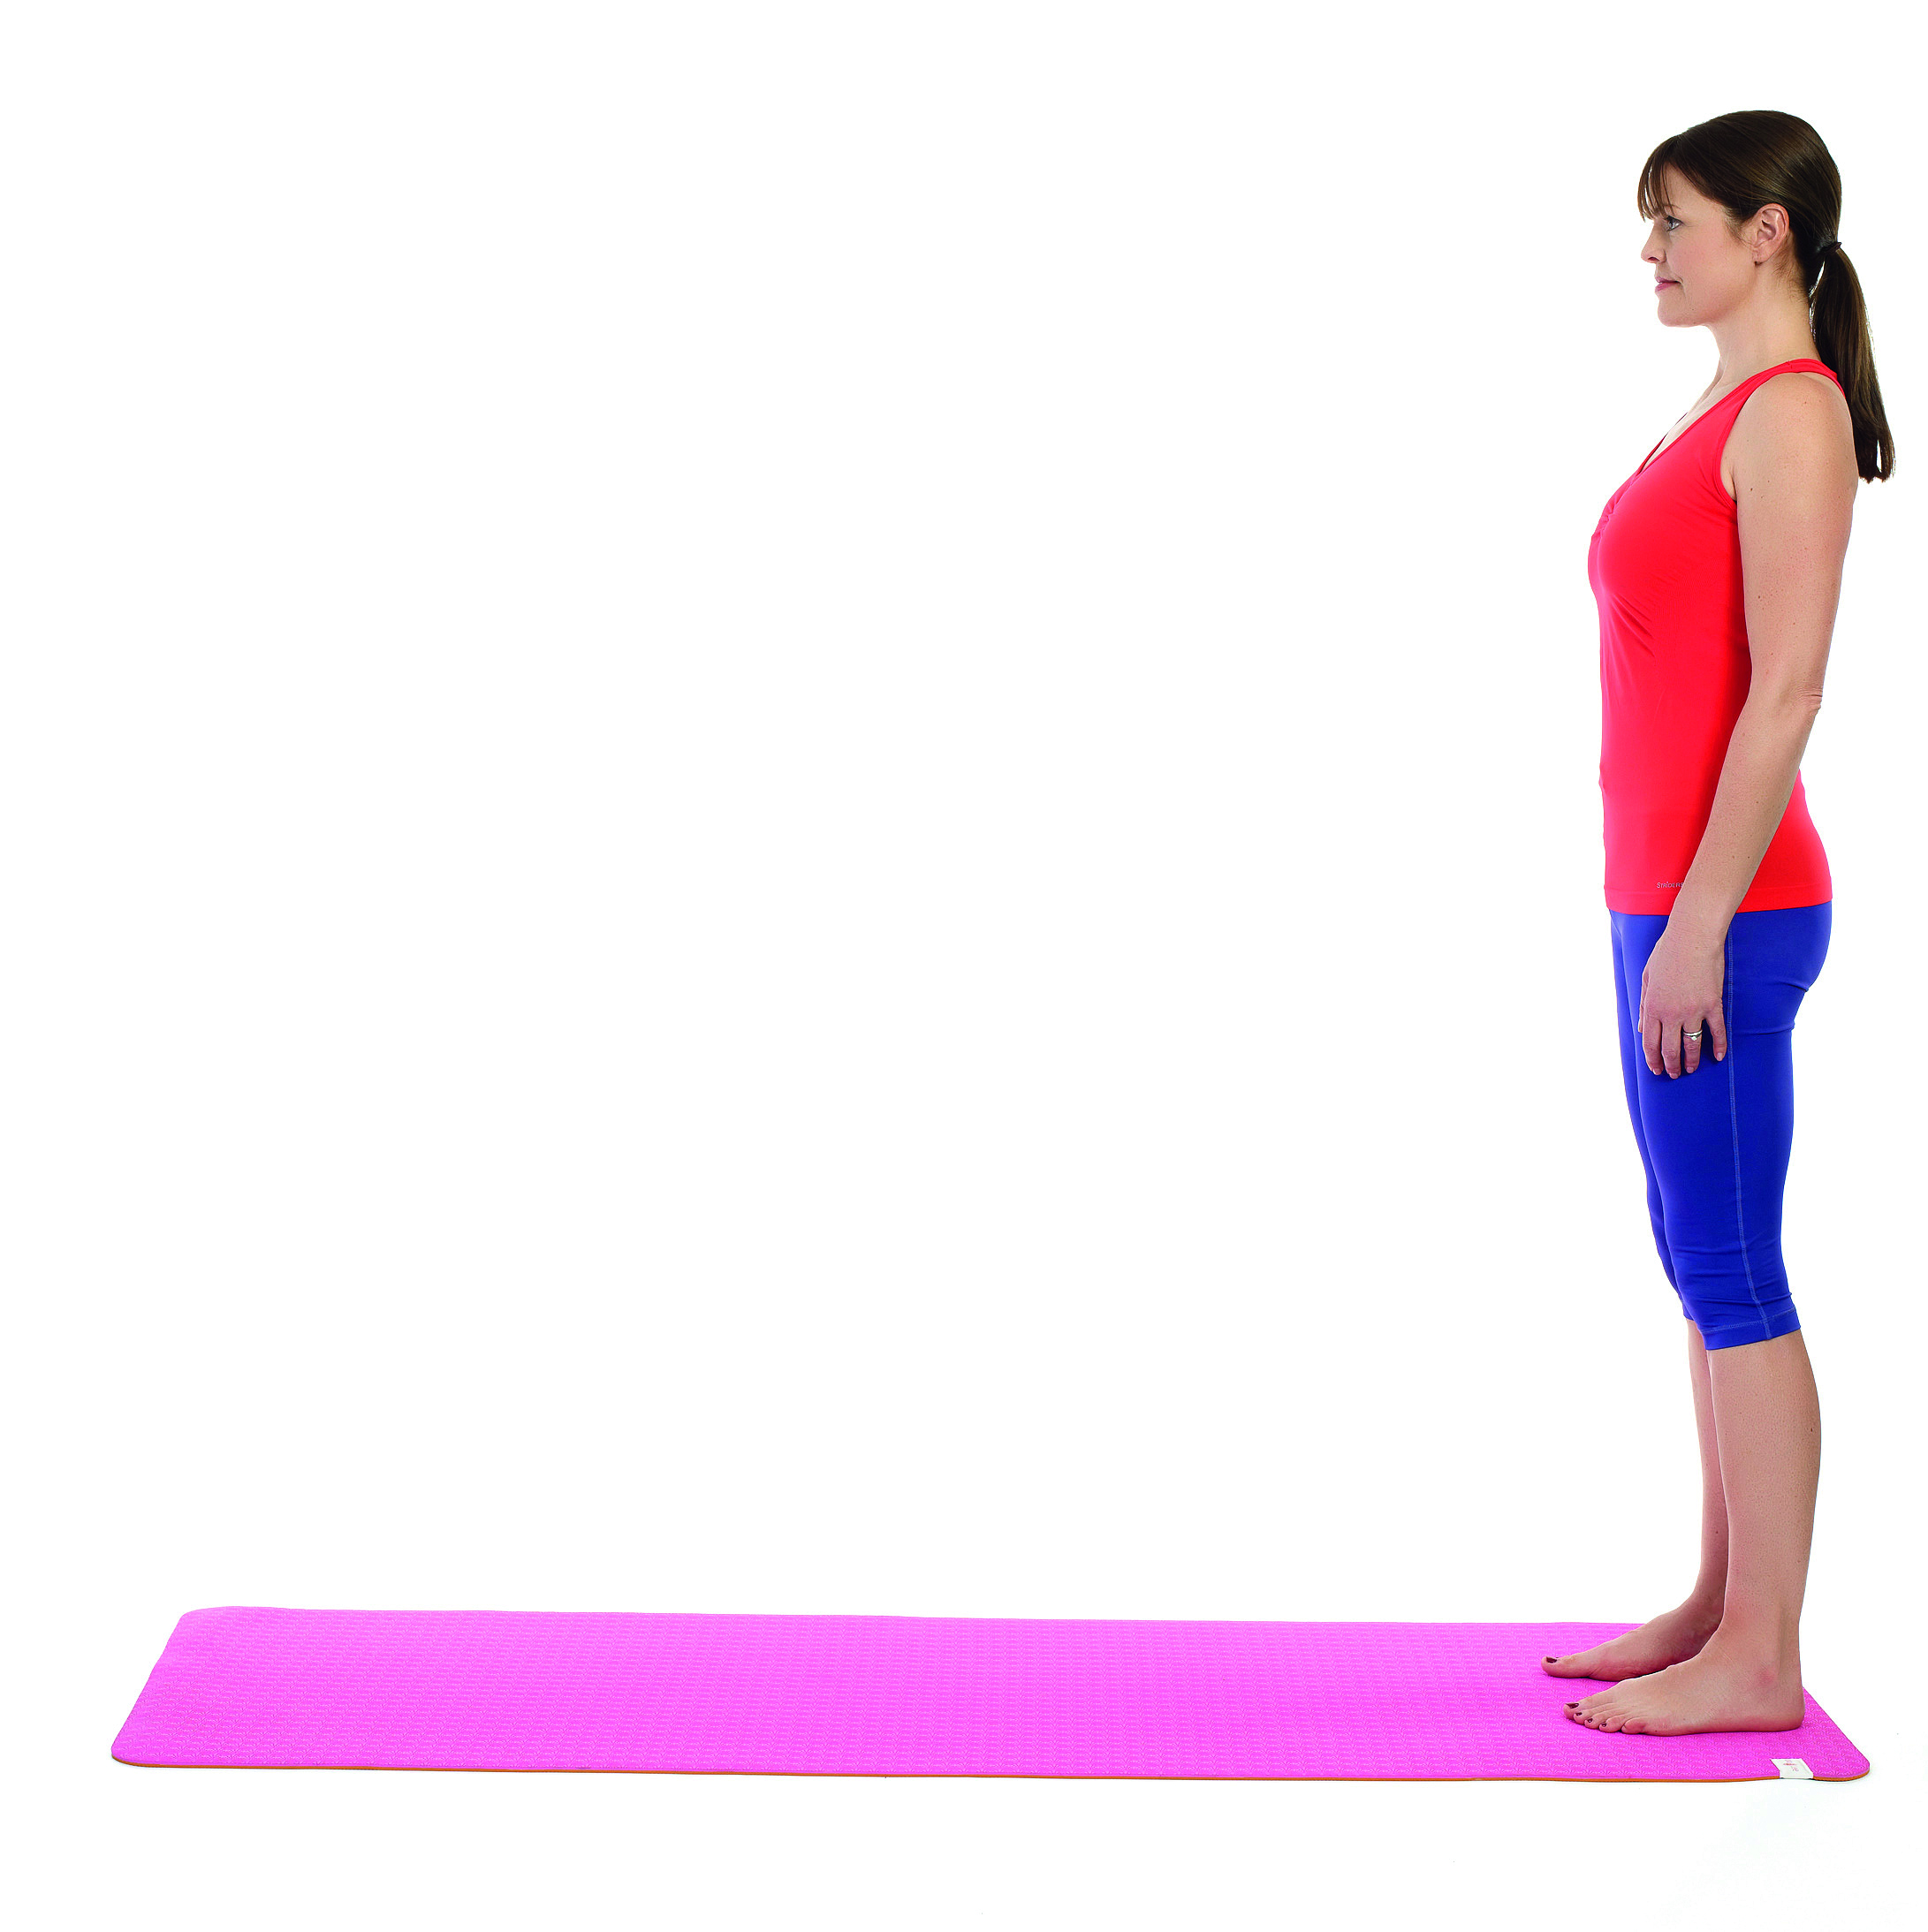 1 Minute Pilates Workout on the Mat